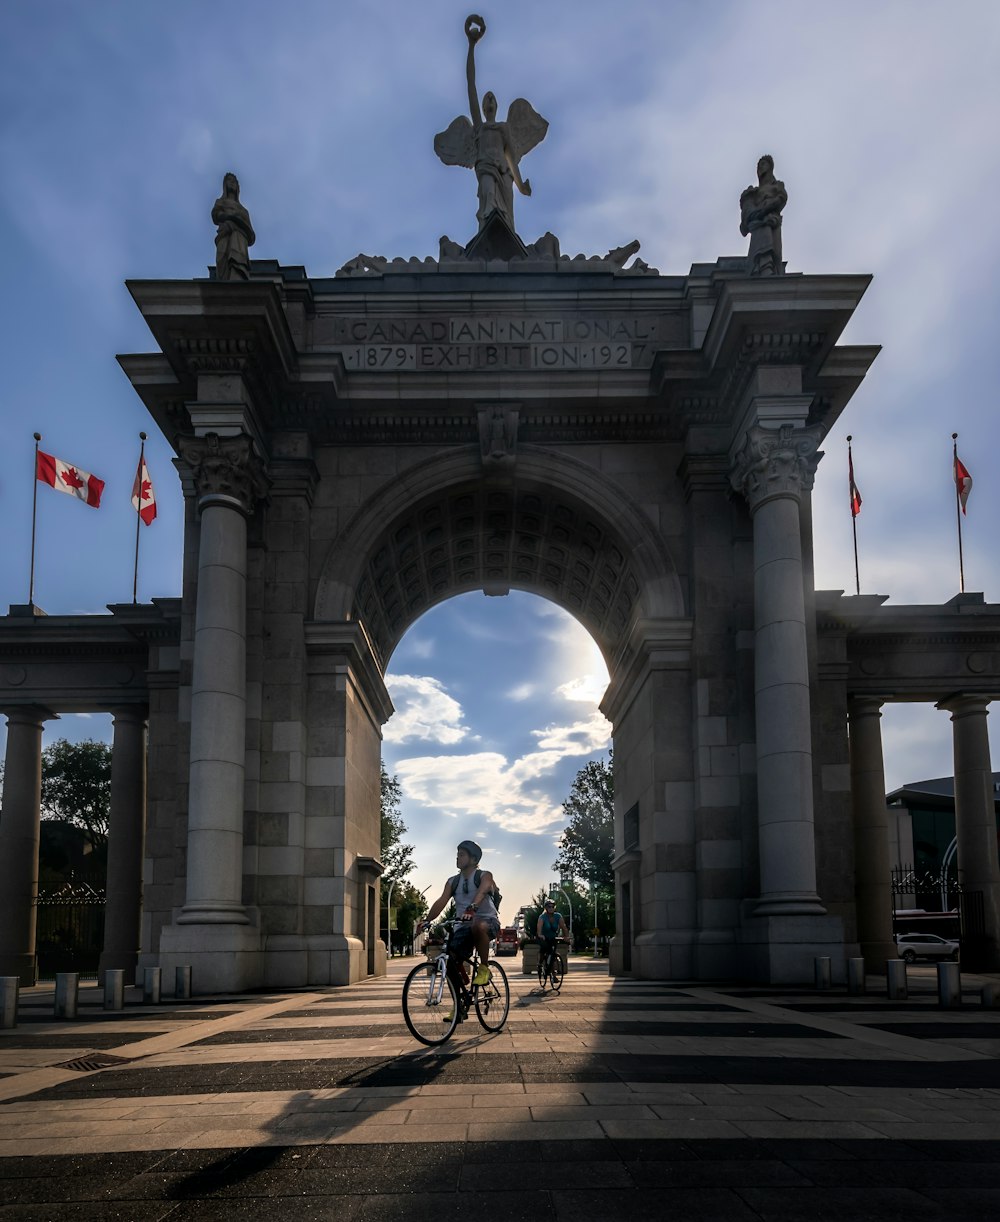 a person riding a bike in front of a stone arch